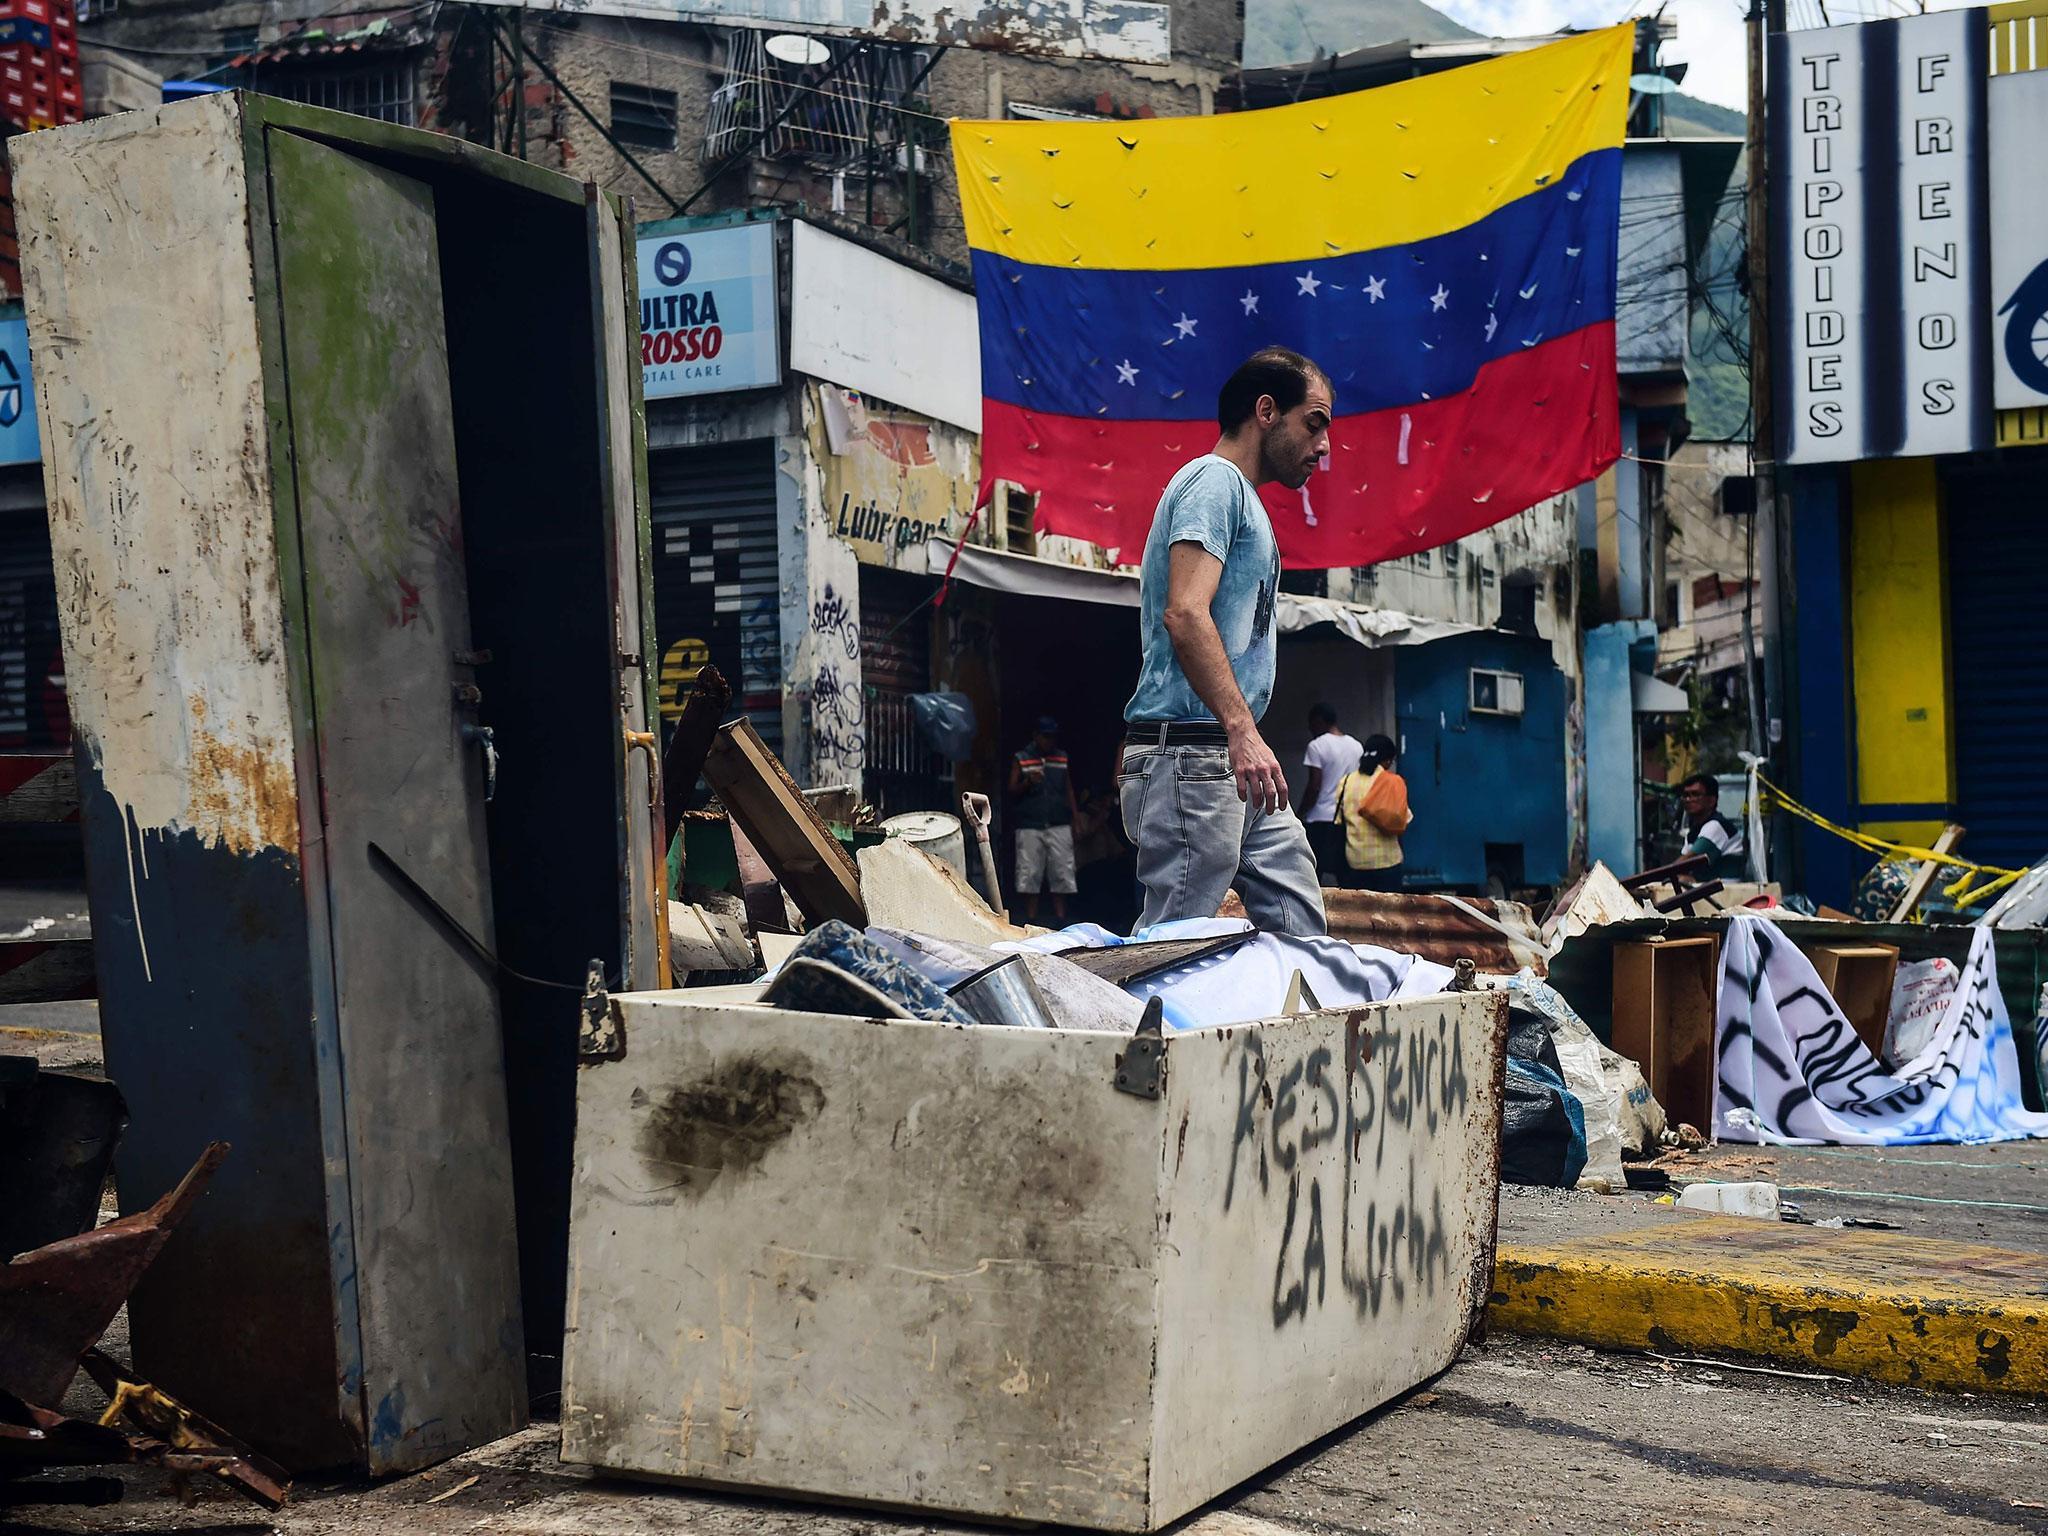 Maduro’s reforms have led to protests on the streets of the capital Caracas